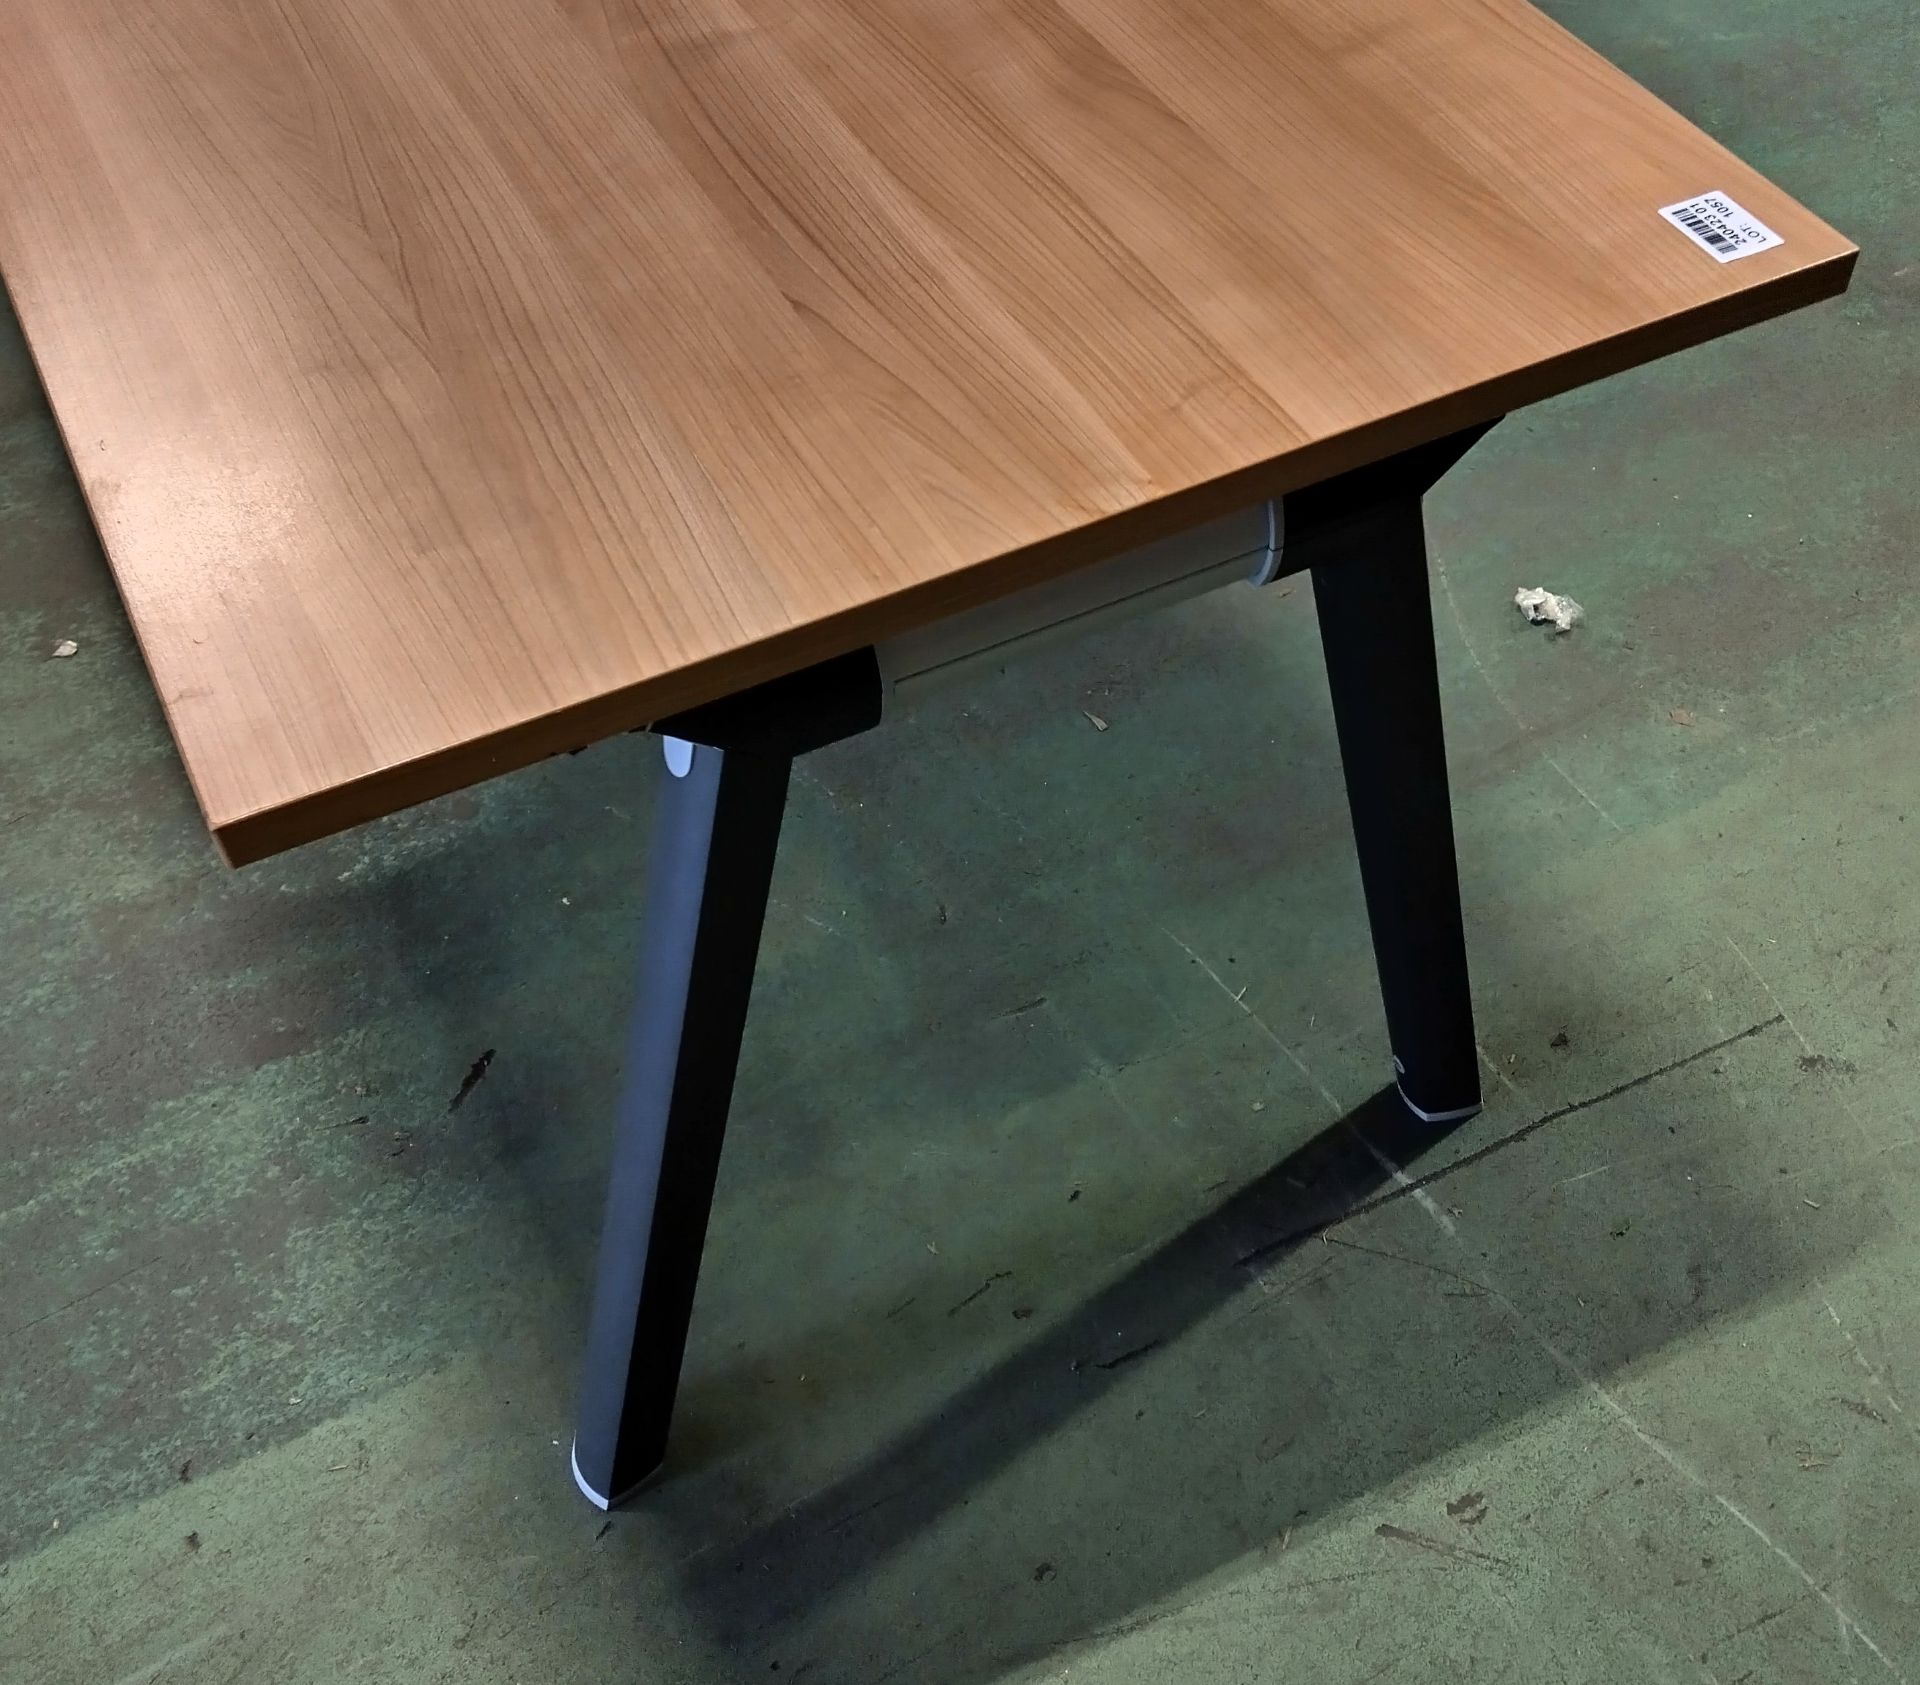 Wooden office desk - L 1400 x W 800 x H 730mm - Image 2 of 2